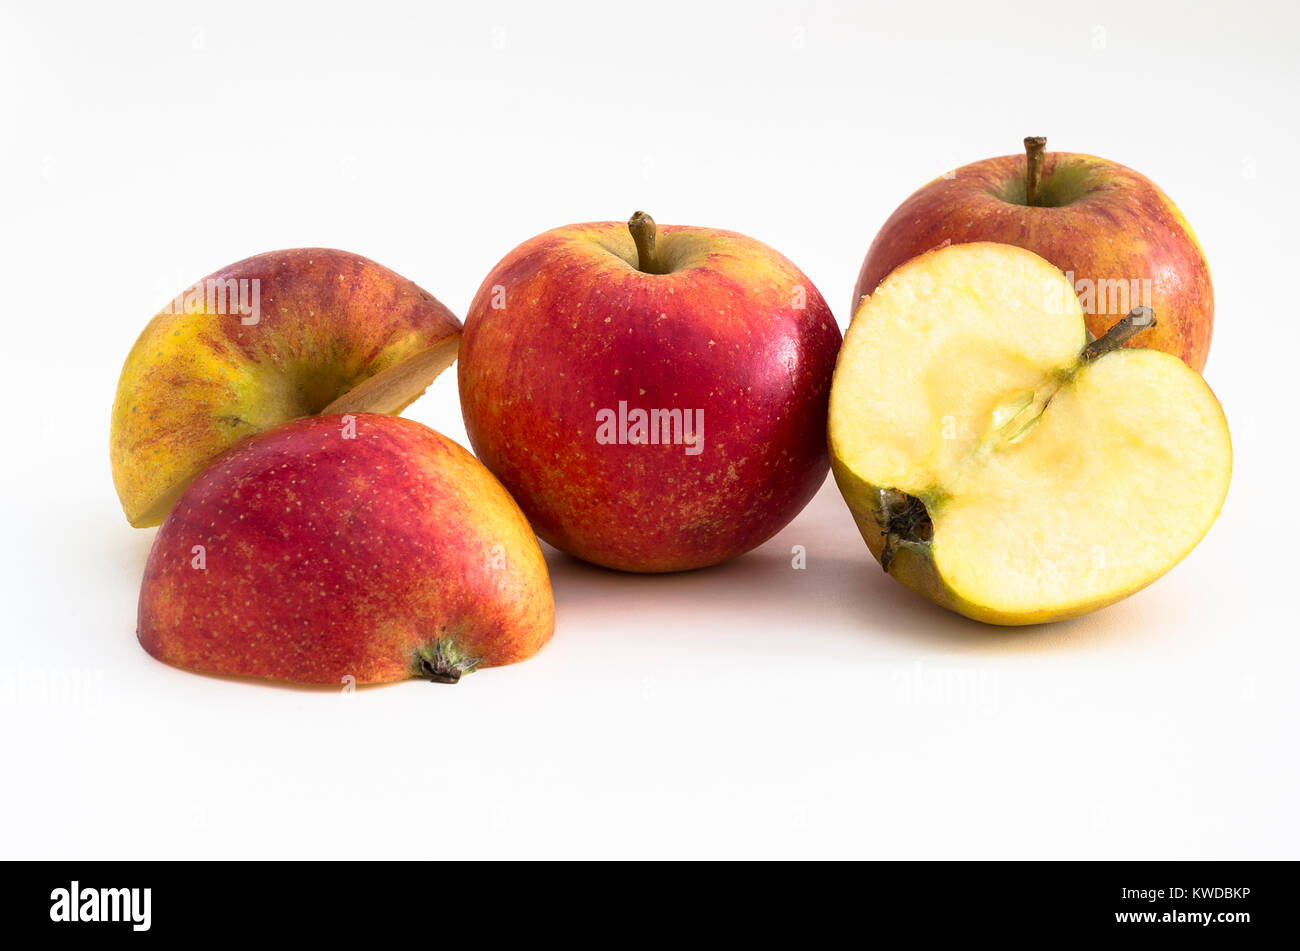 Apple fruit Malus domestica WINTER WONDER ready for eating at Christmas in UK Stock Photo